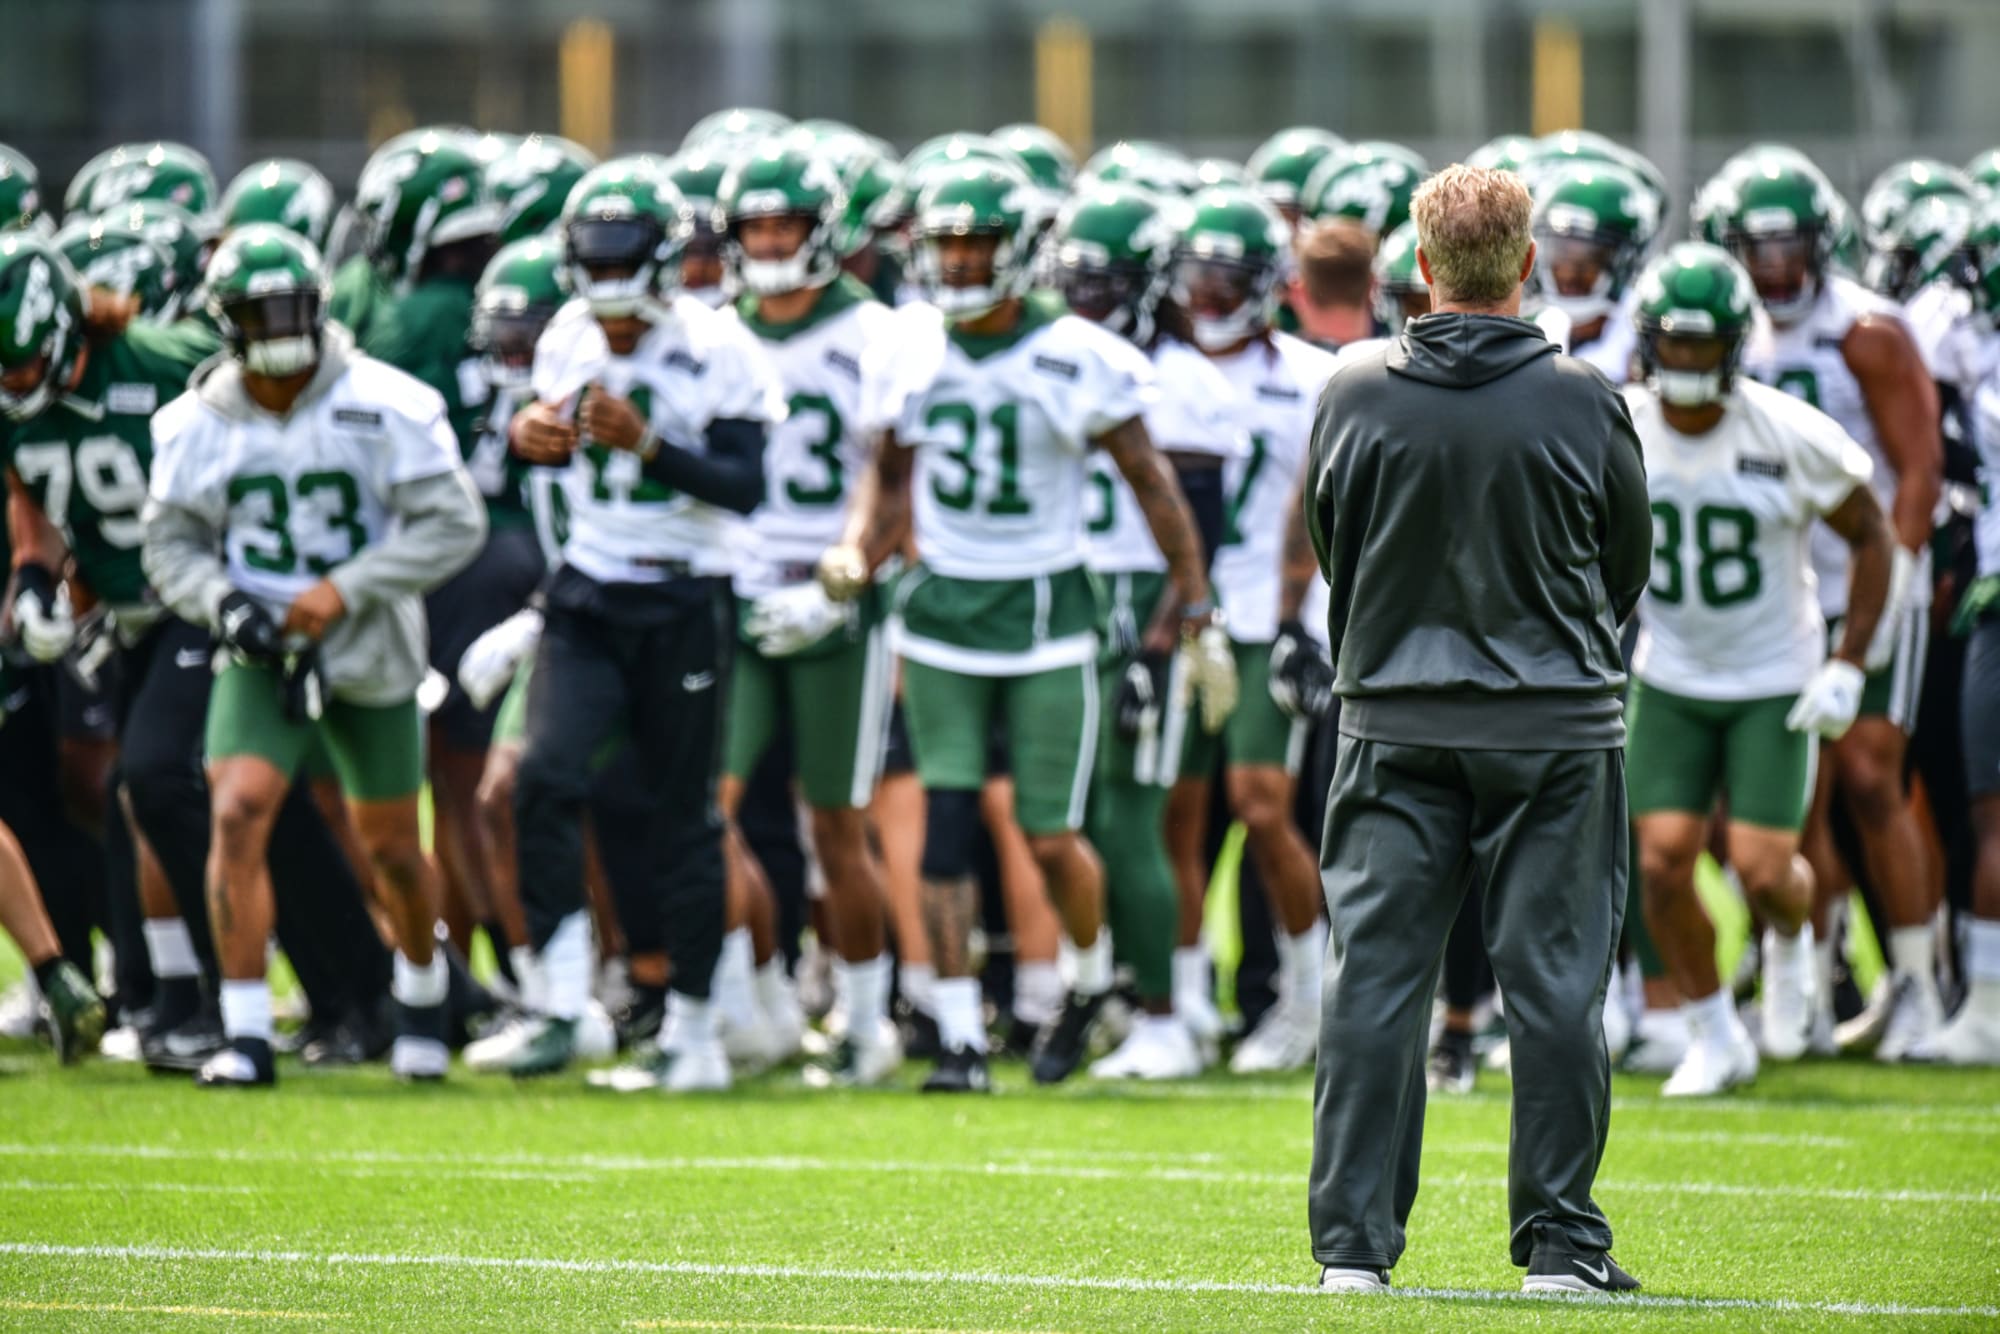 NY Jets officially given the green light to open training camp